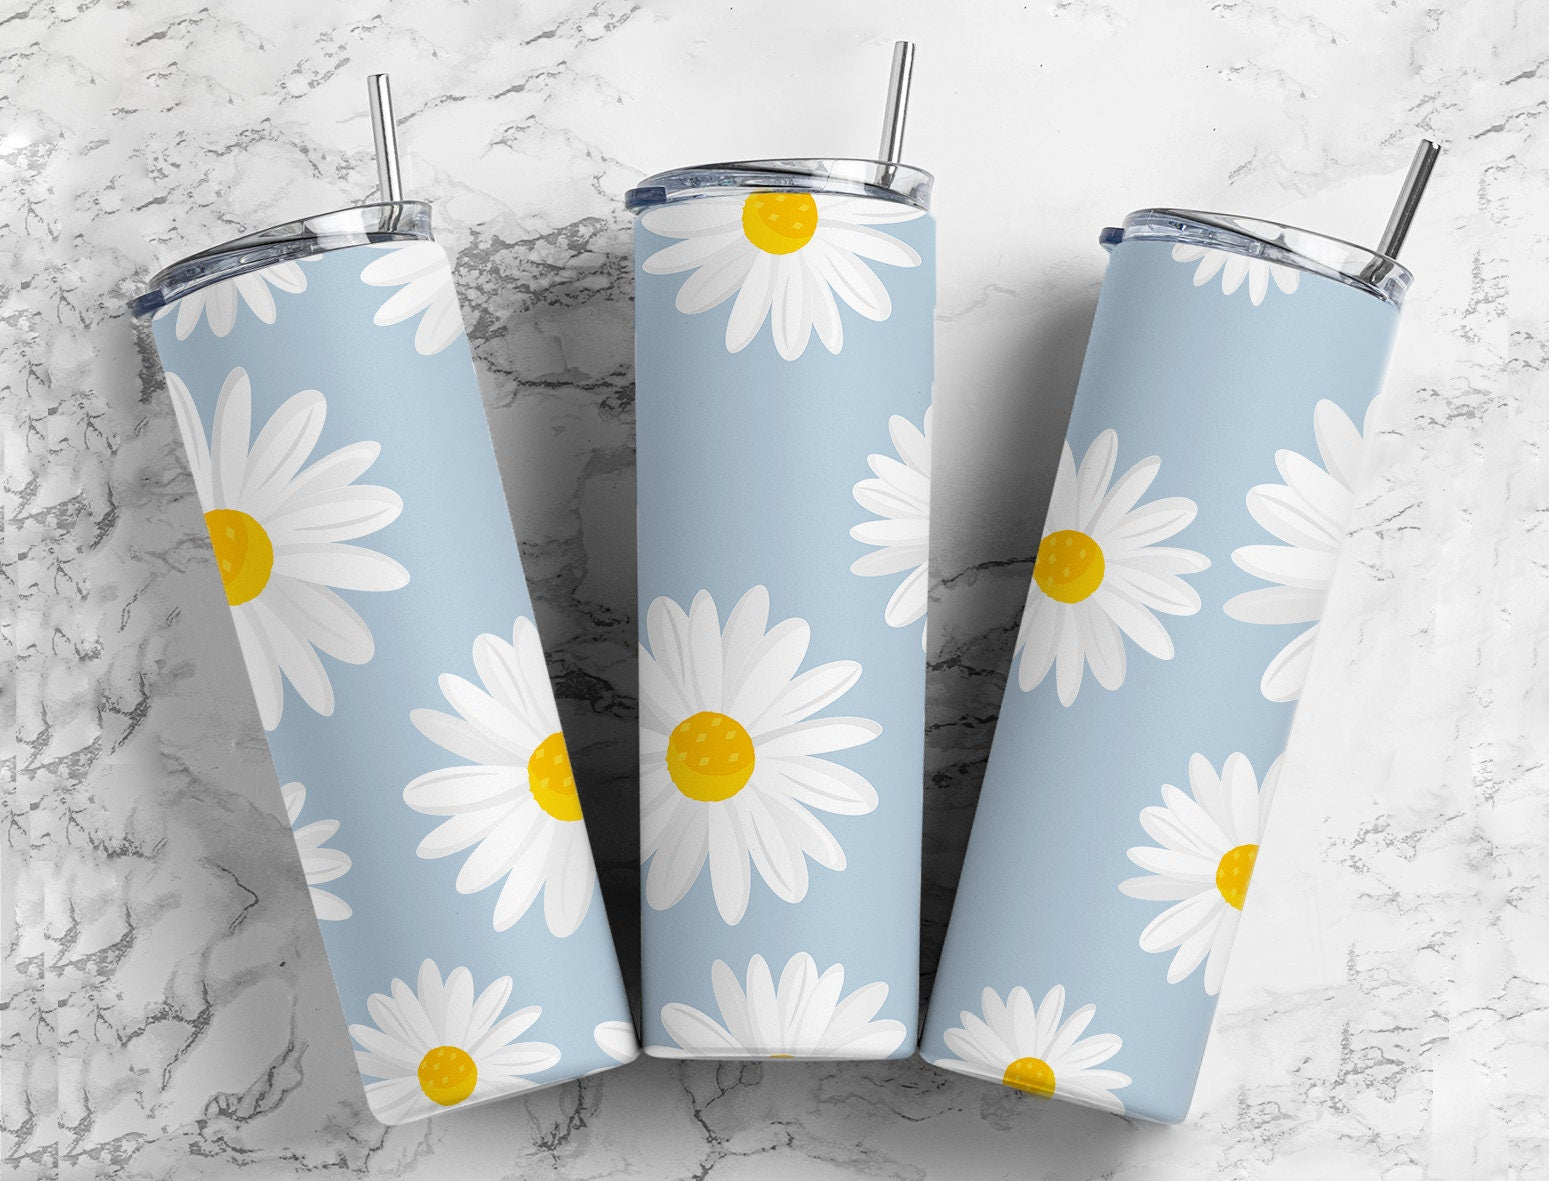 Tumbler sublimation design with daisy